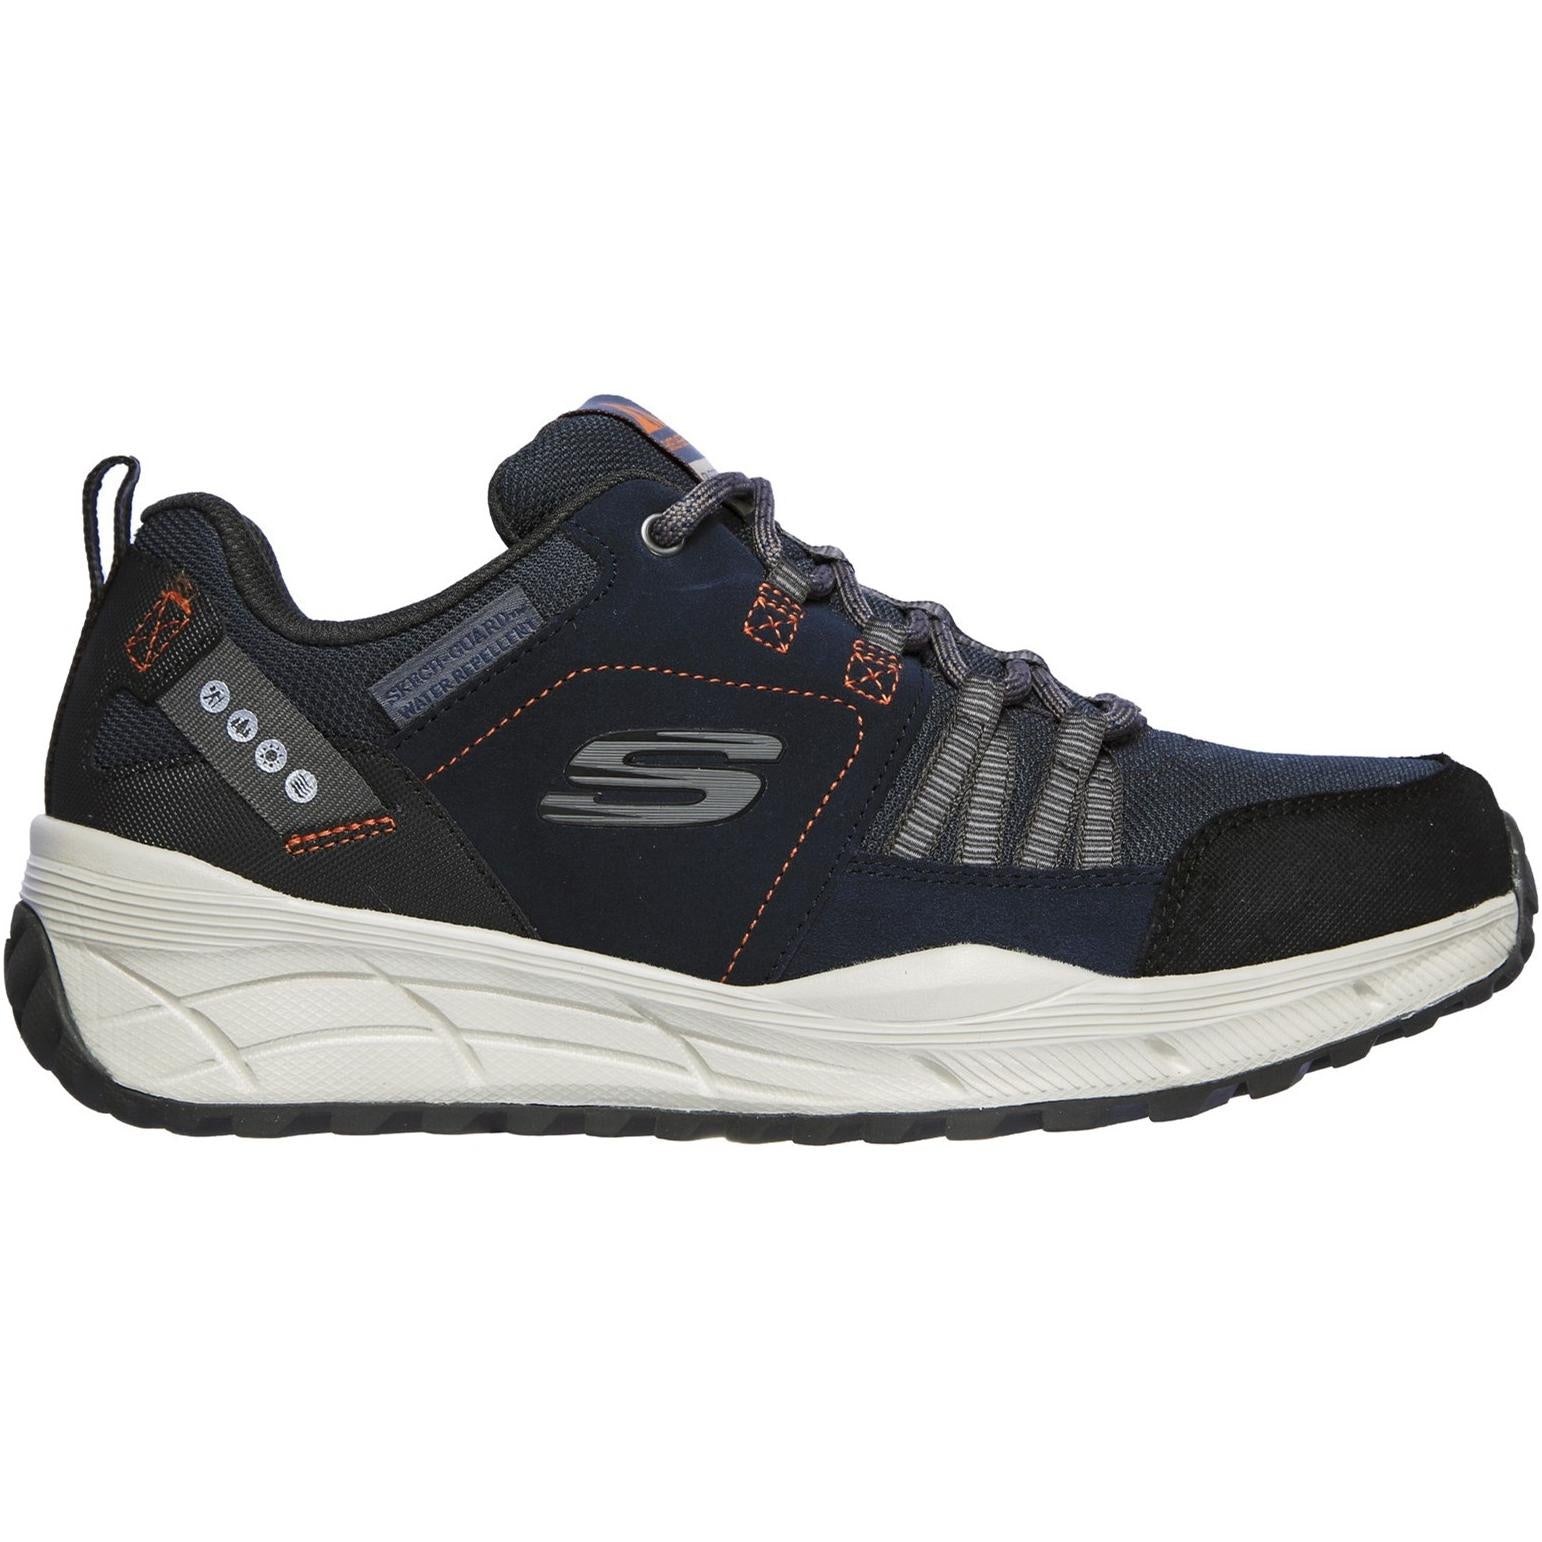 Skechers Equalizer 4.0 Trail Sports Shoes